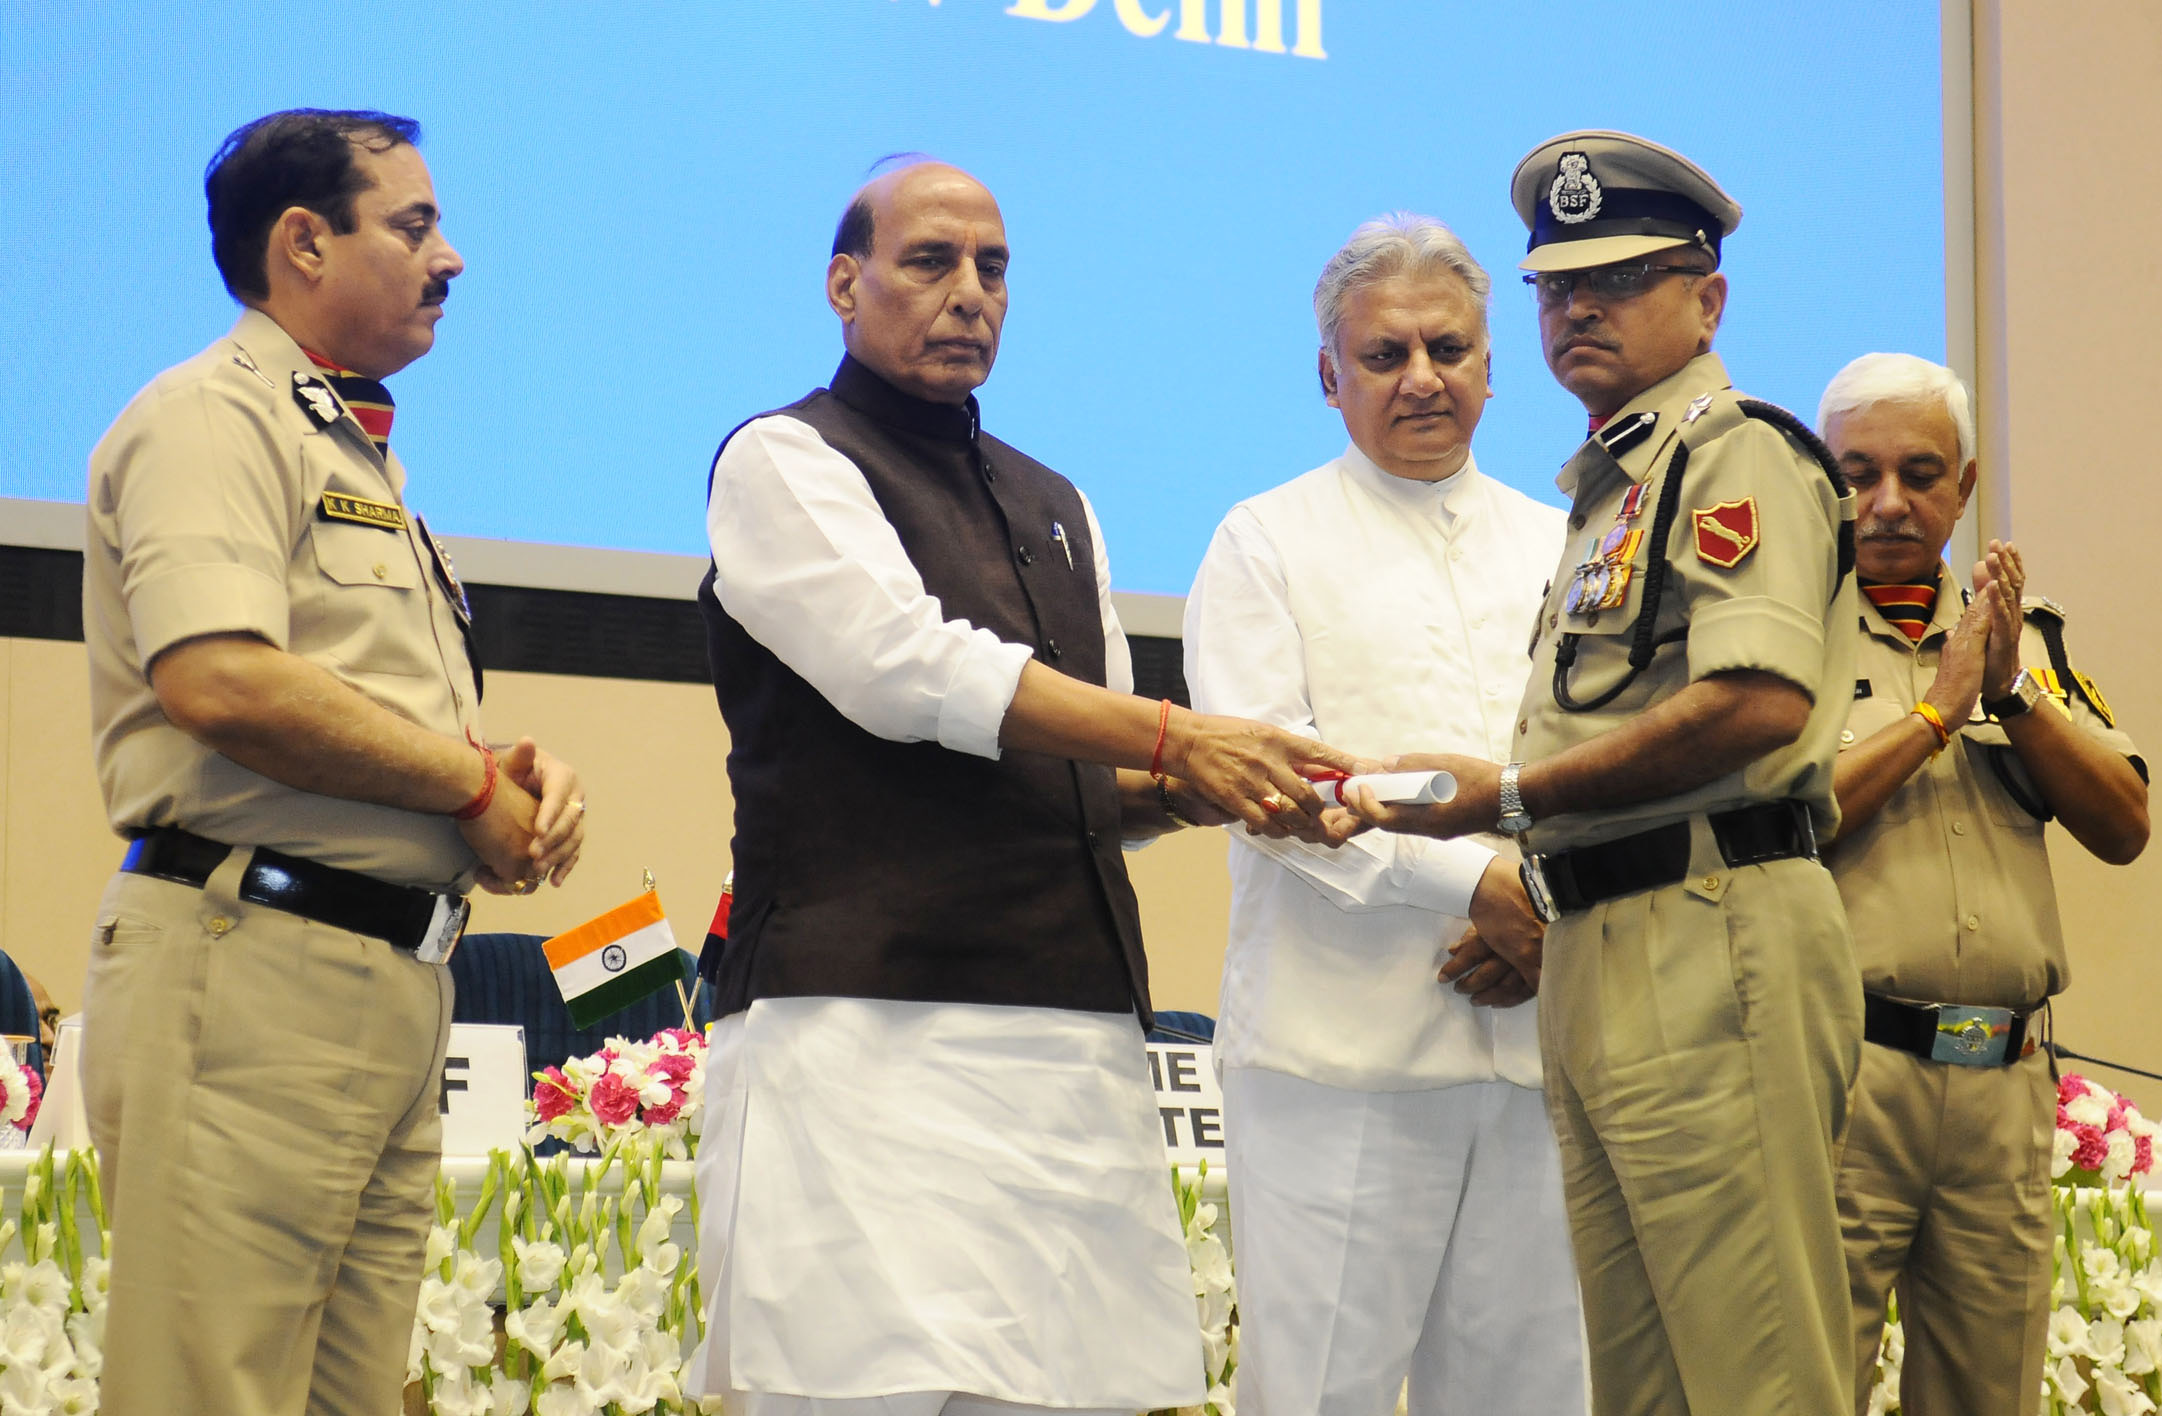 The Union Home Minister, Shri Rajnath Singh presenting the awards, at the Investiture Ceremony of Border Security Force (BSF), in New Delhi on May 22, 2018. The DG, BSF, Shri K.K. Sharma and the Director IB, Shri Rajiv Jain are also seen.